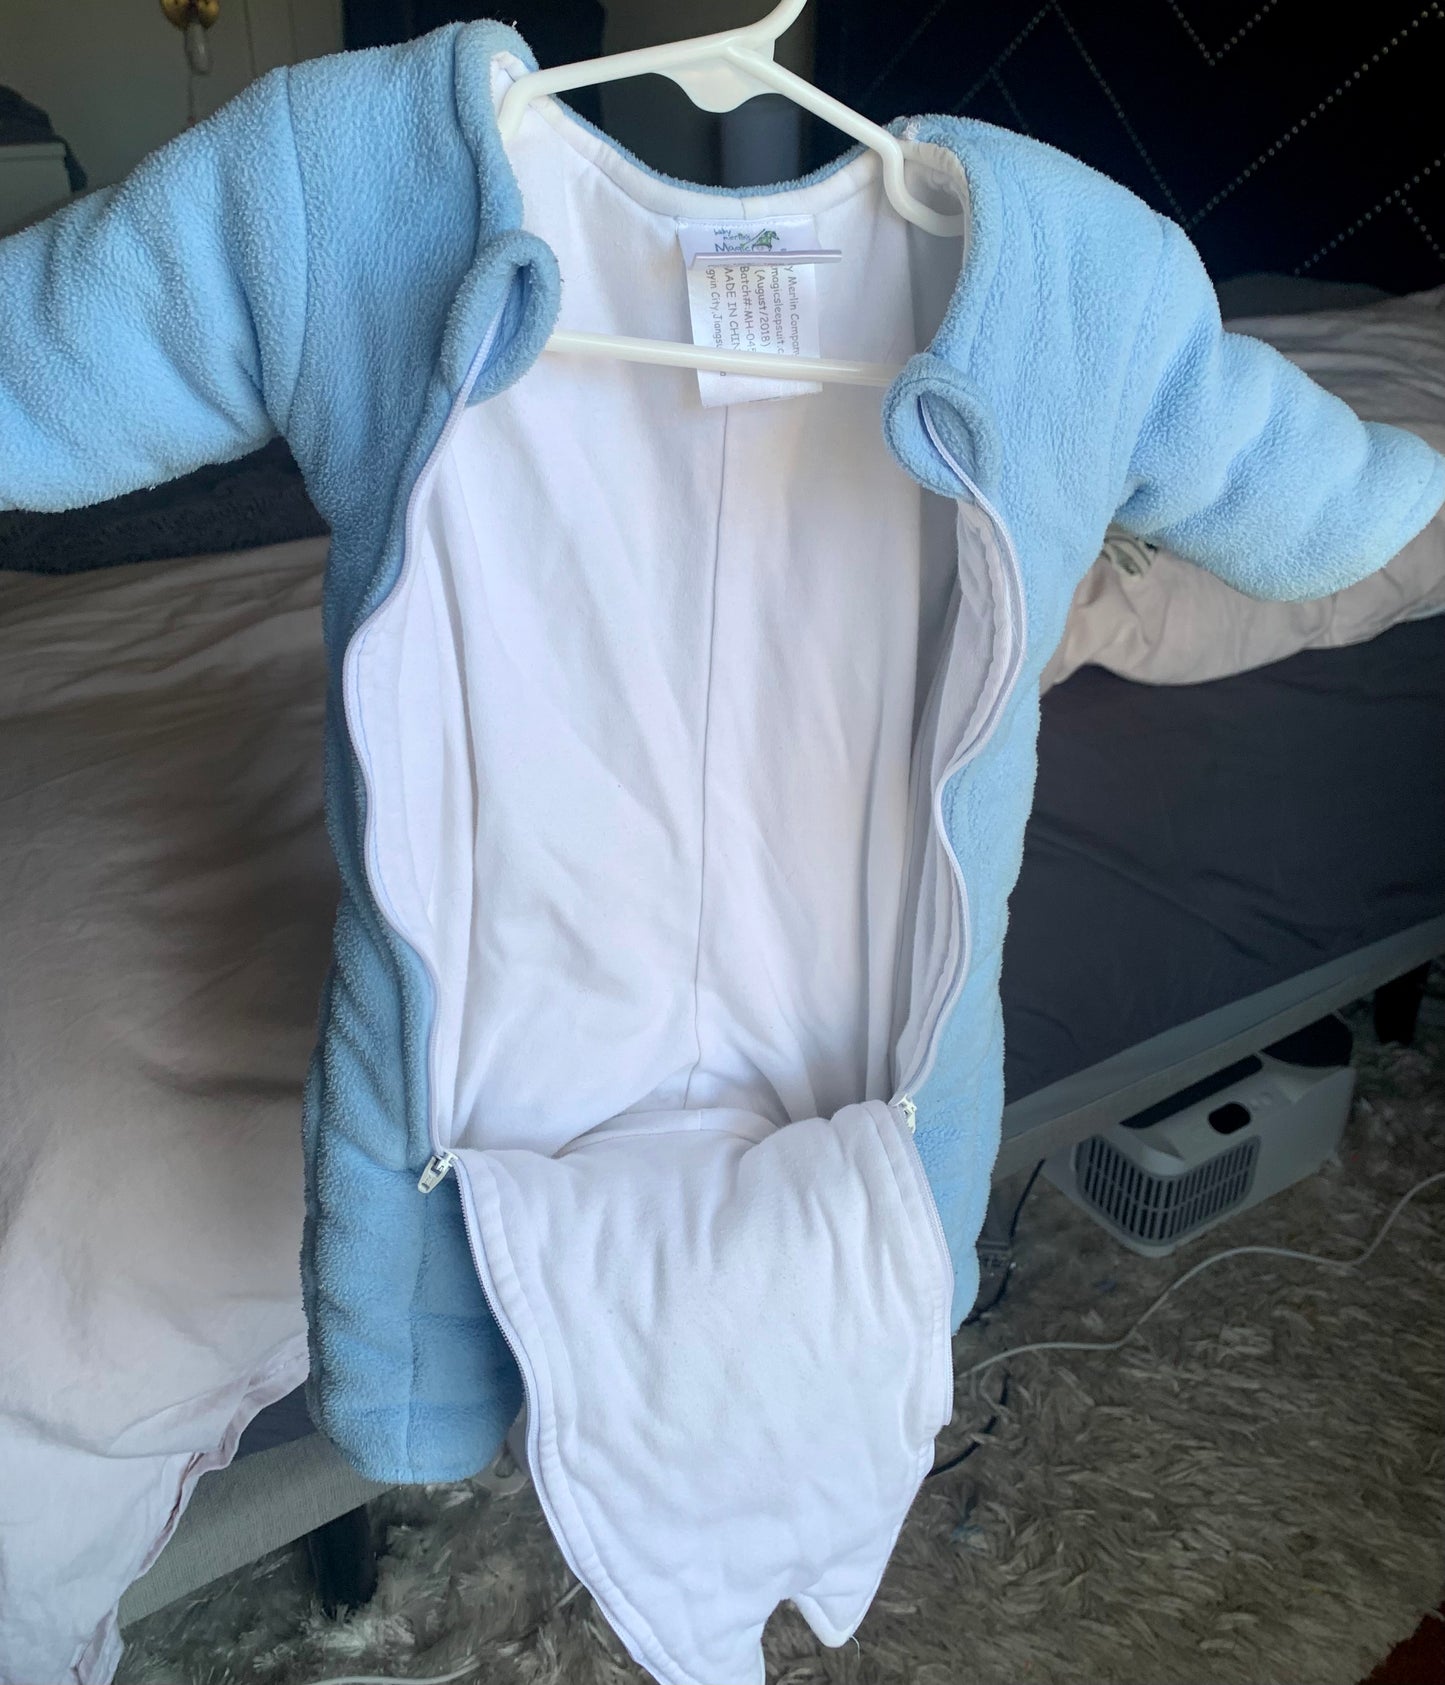 Merlin’s Magic Sleepsuit - Small, 3-6 months, 12-18lbs